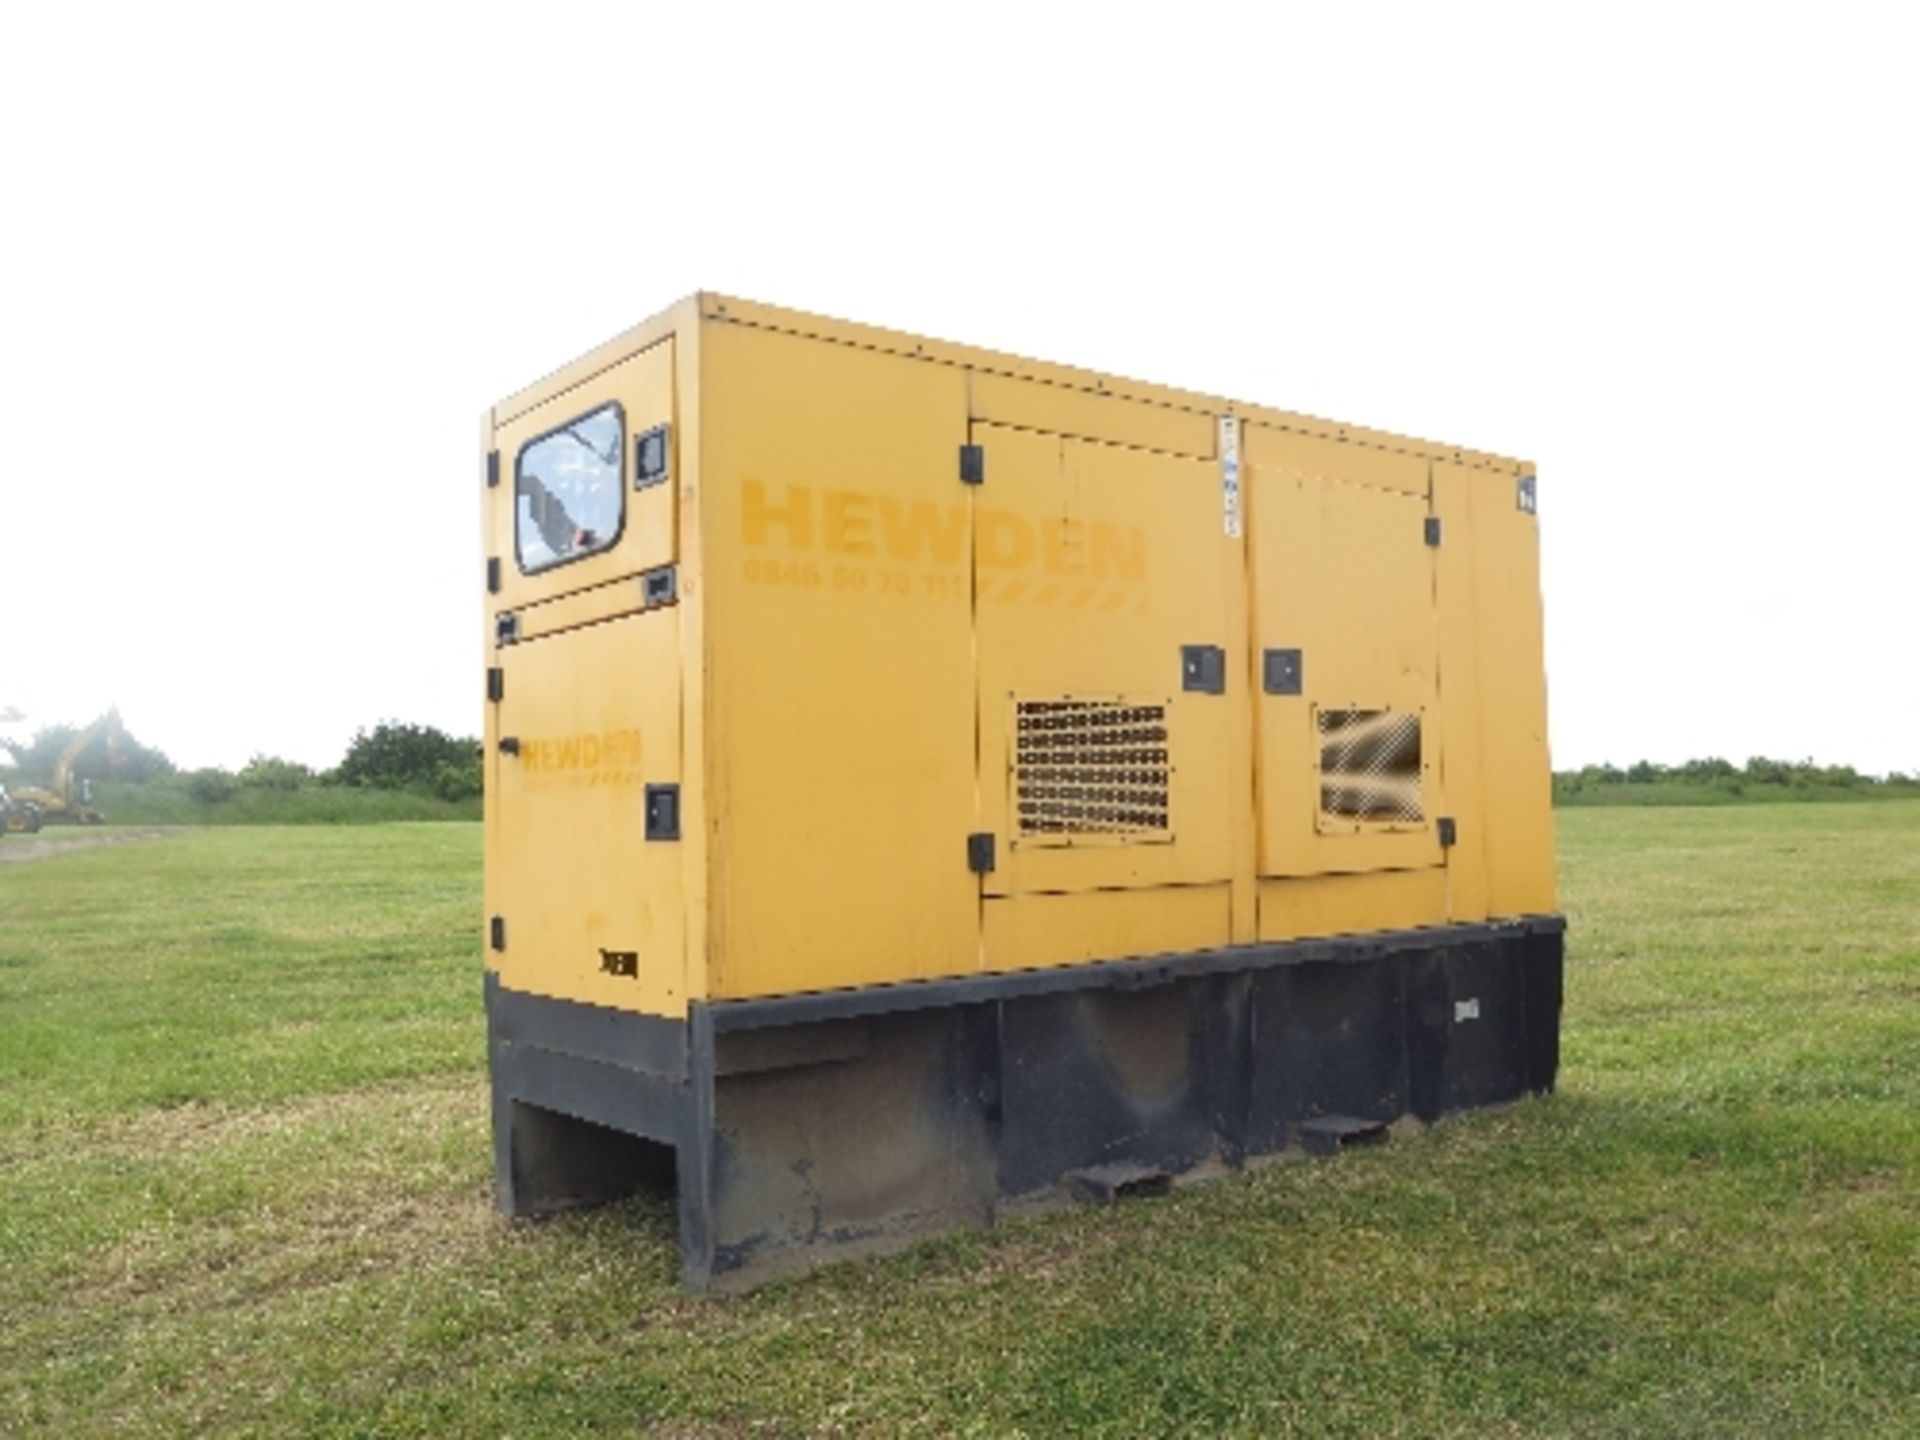 Caterpillar XQE80 generator 24396 hrs 157818
PERKINS - STARTS AND RUNS BUT ENGINE KNOCK
ALL LOTS